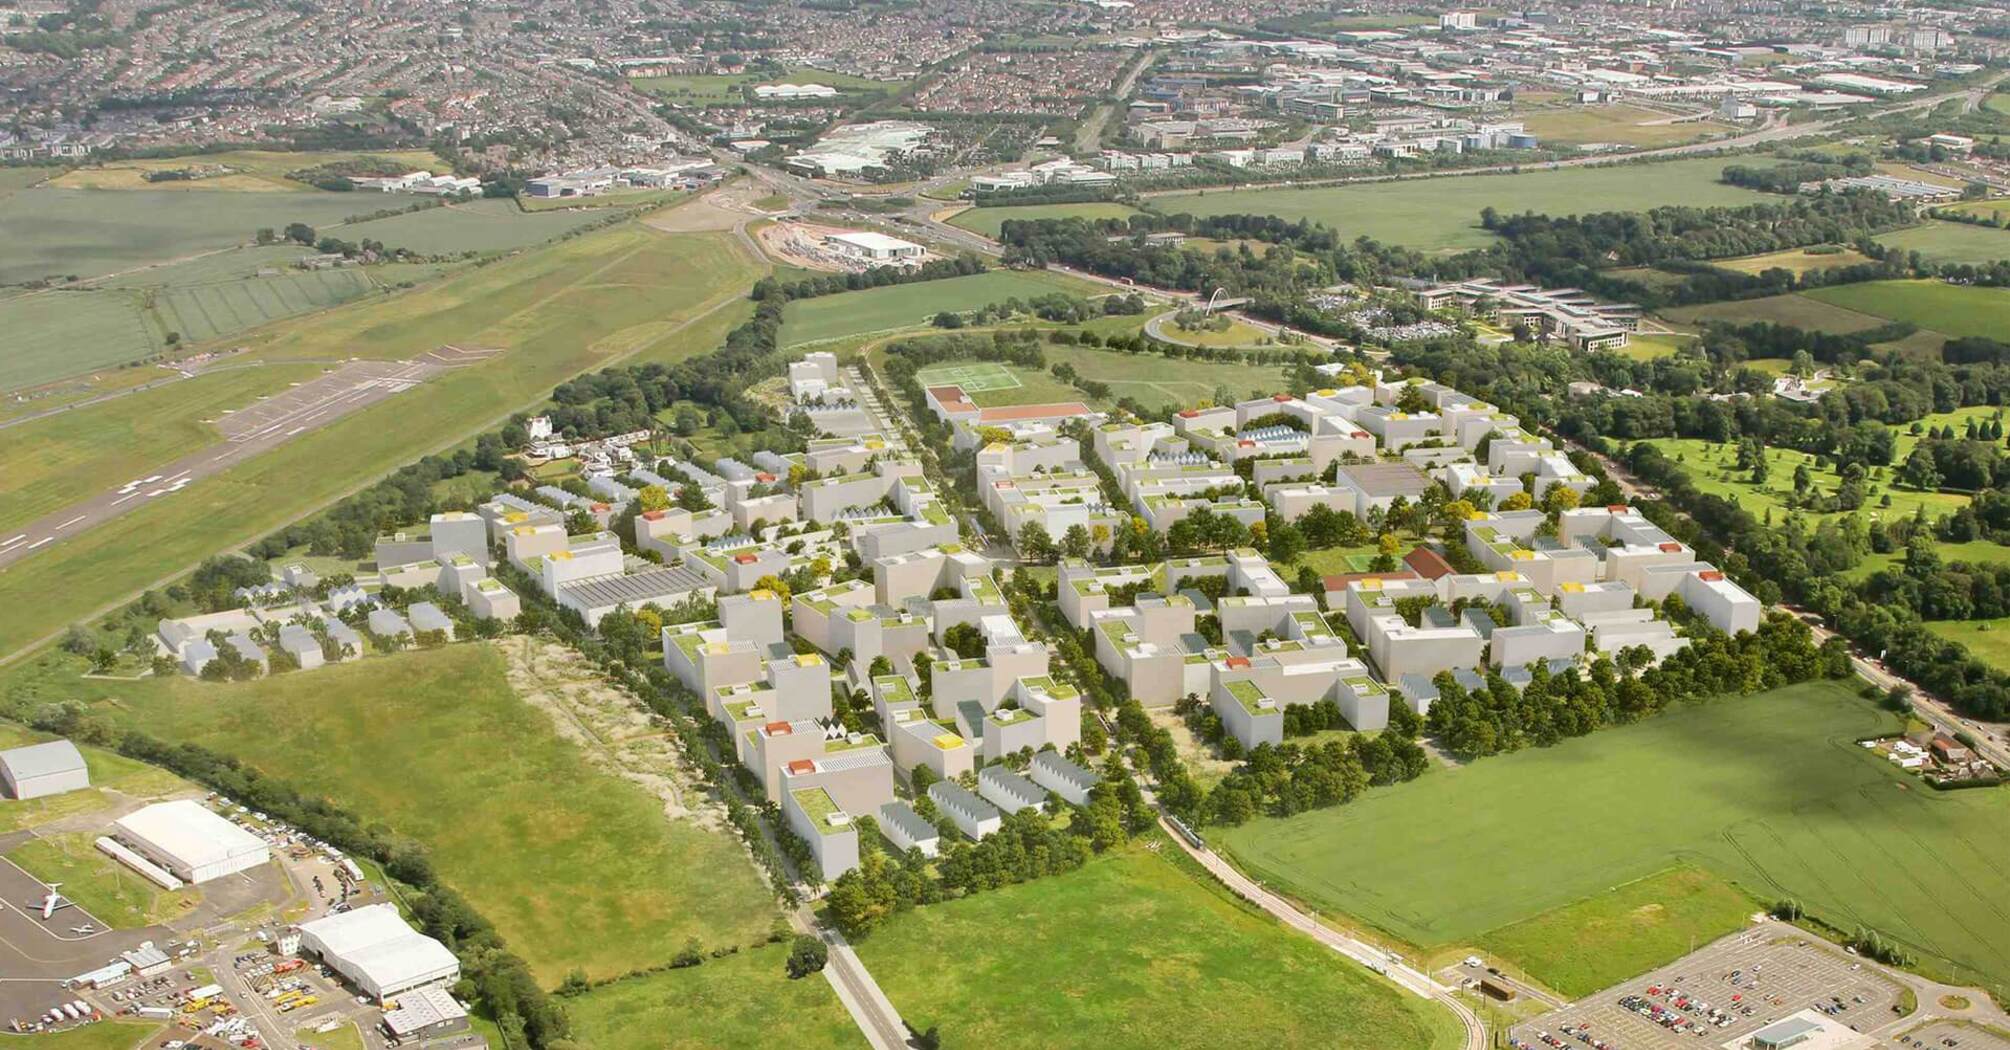 A modern residential complex for 7 thousand houses will be built on the outskirts of a famous British city